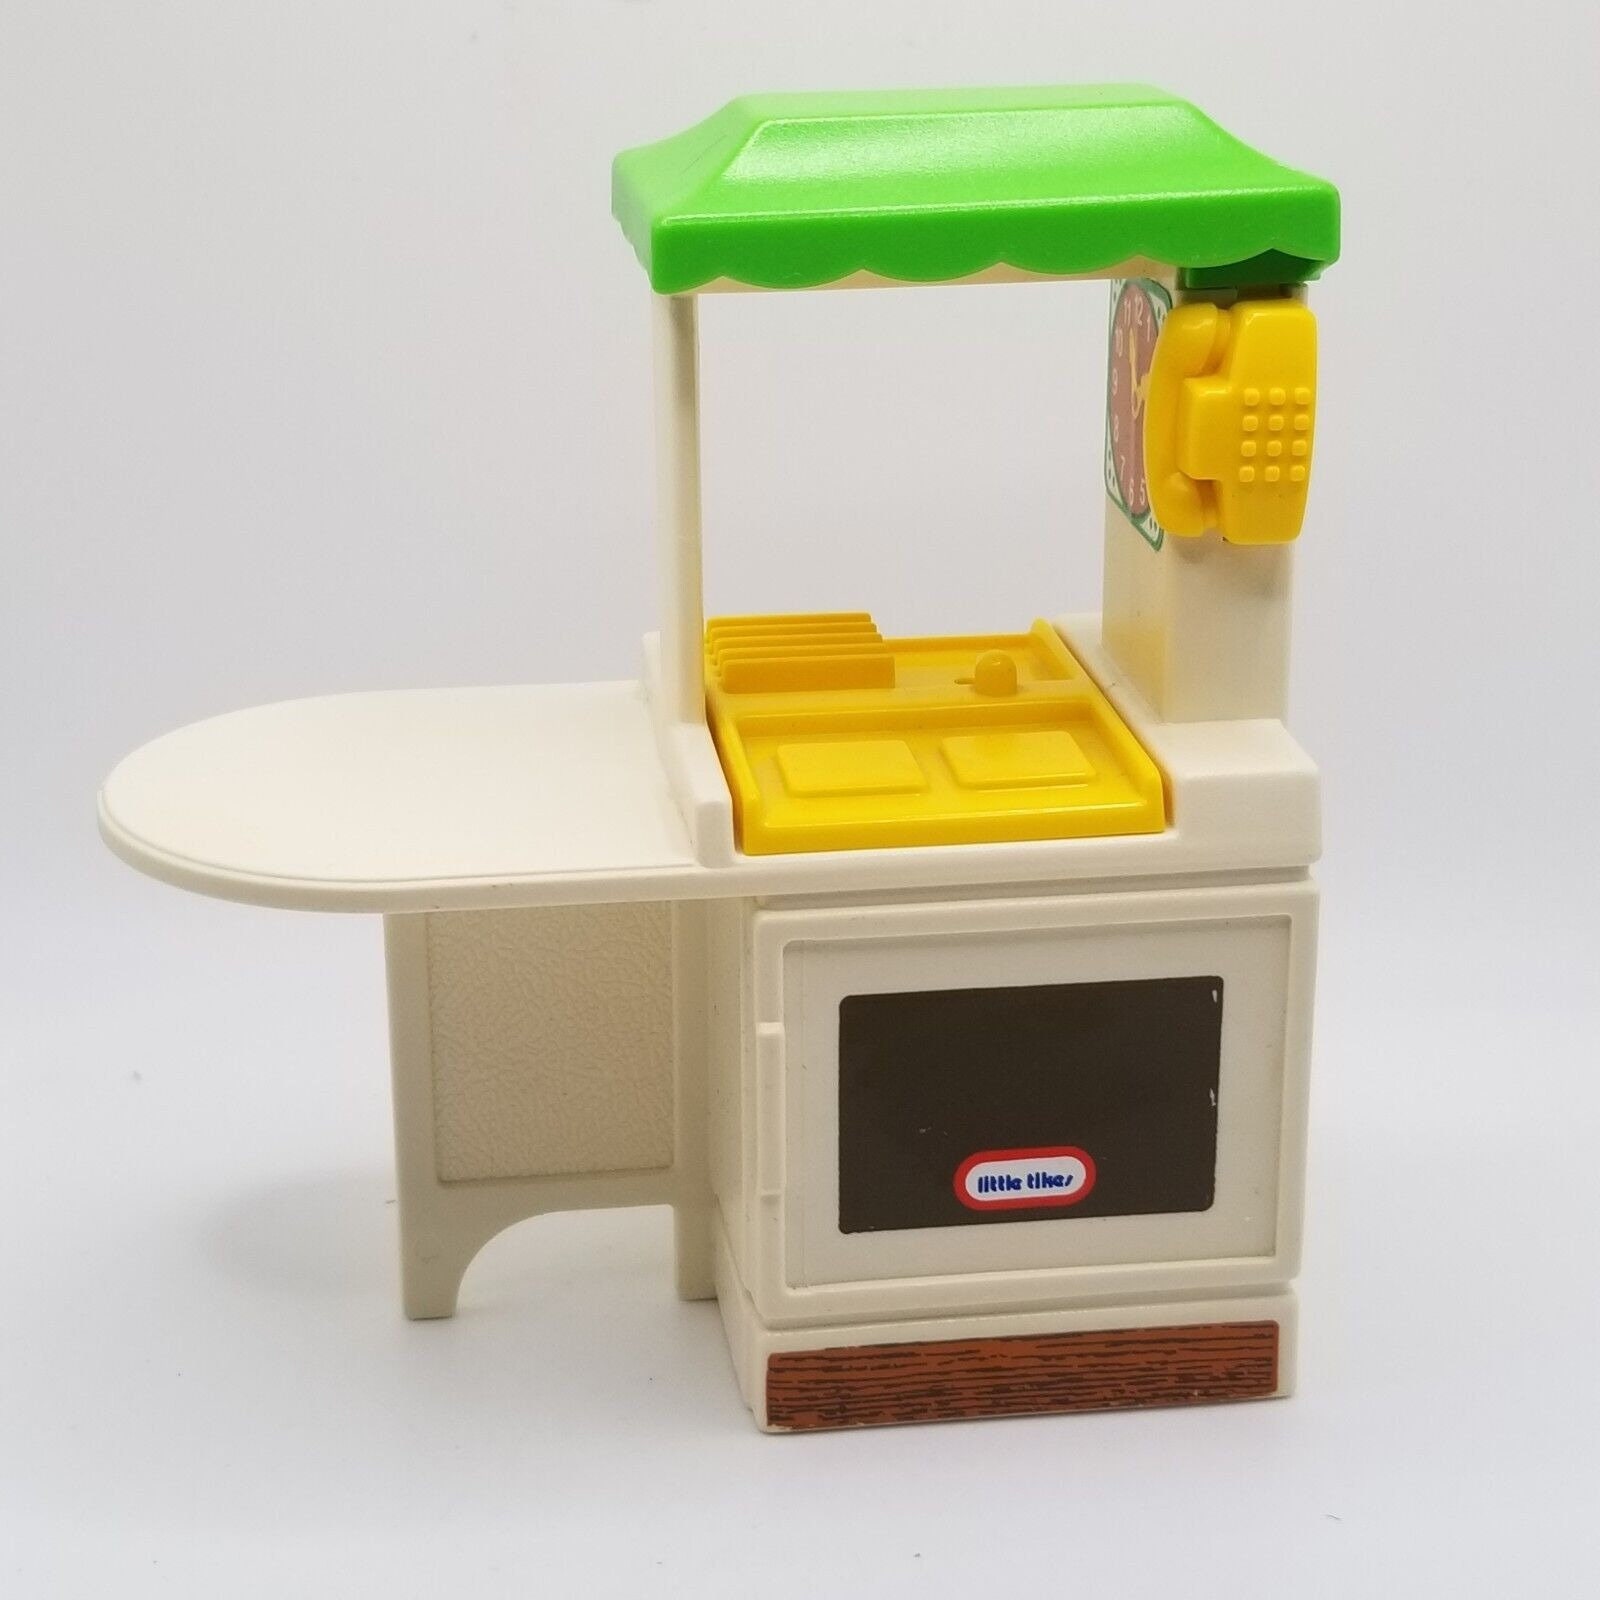 Retro Fun Farberware Kitchen Play Set From the 1990s Stand 